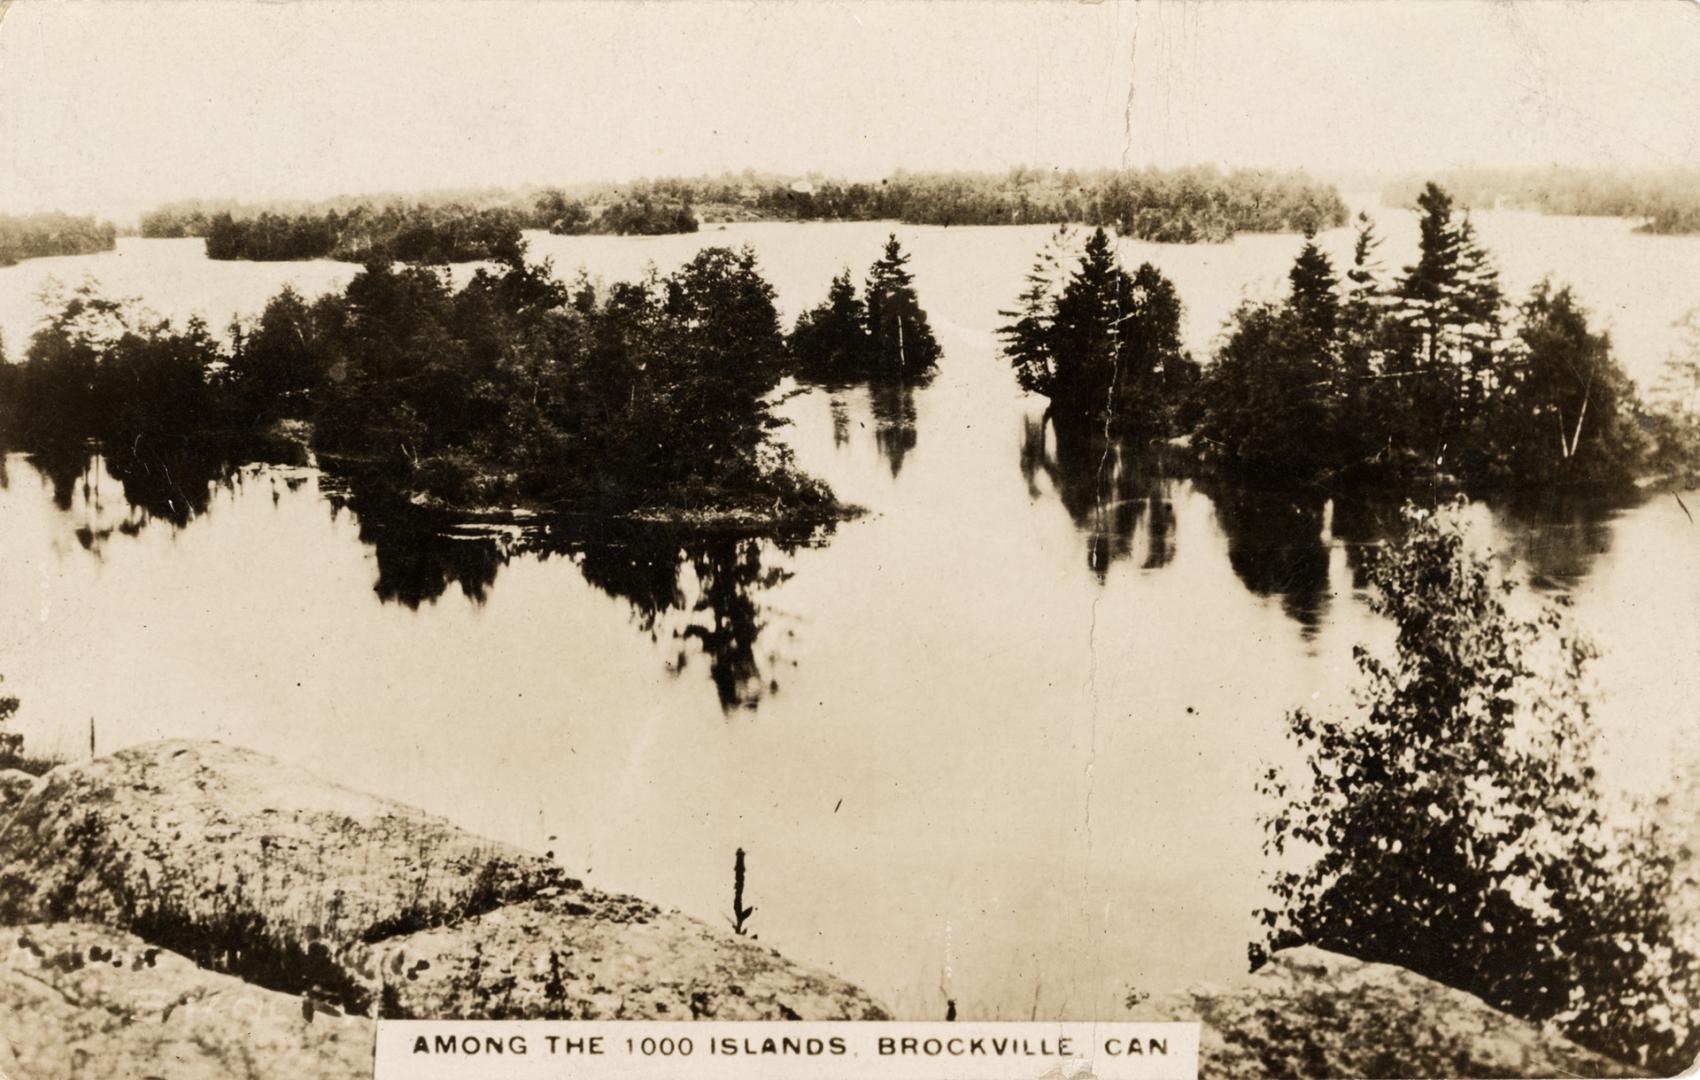 Black and white photograph of Islands in the middle of a river, 